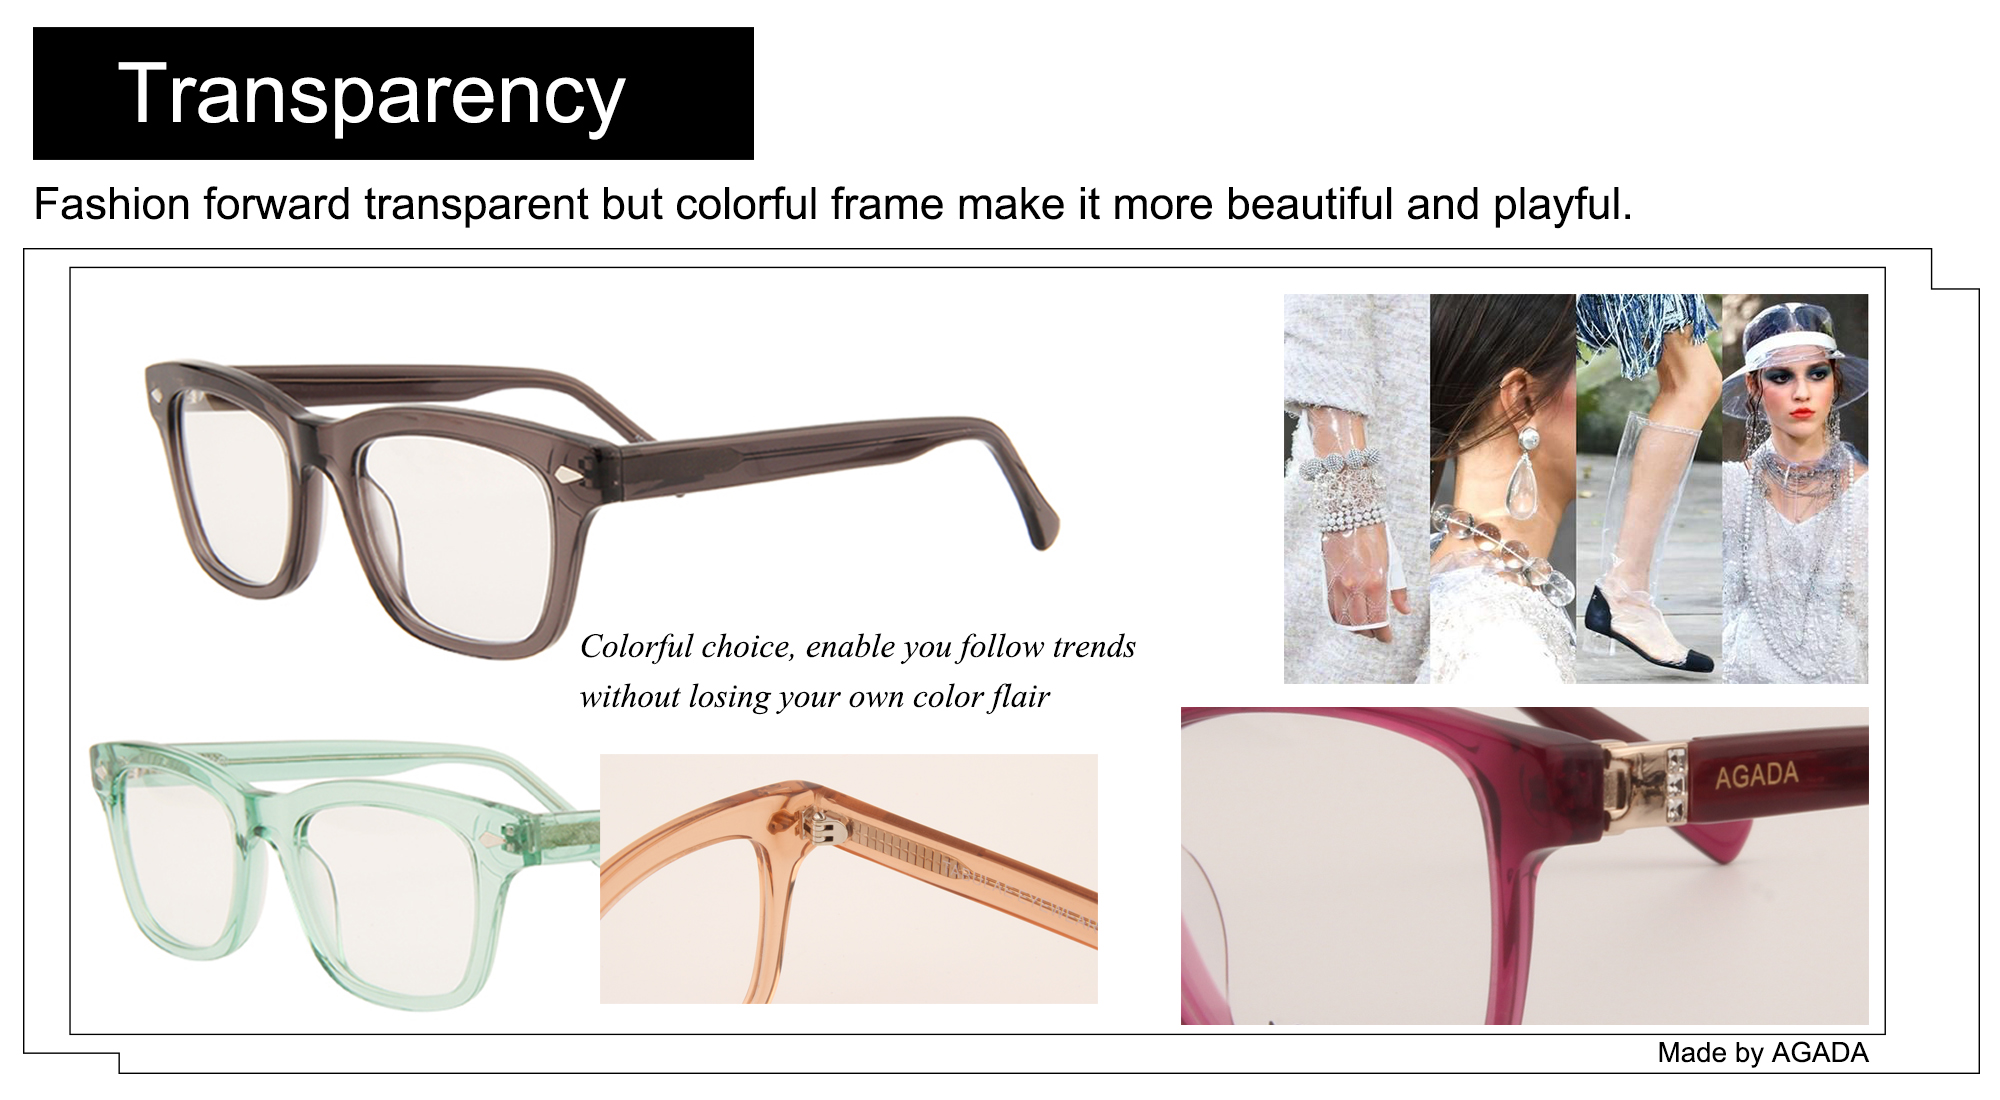 How best use transparency to make eyeglasses?